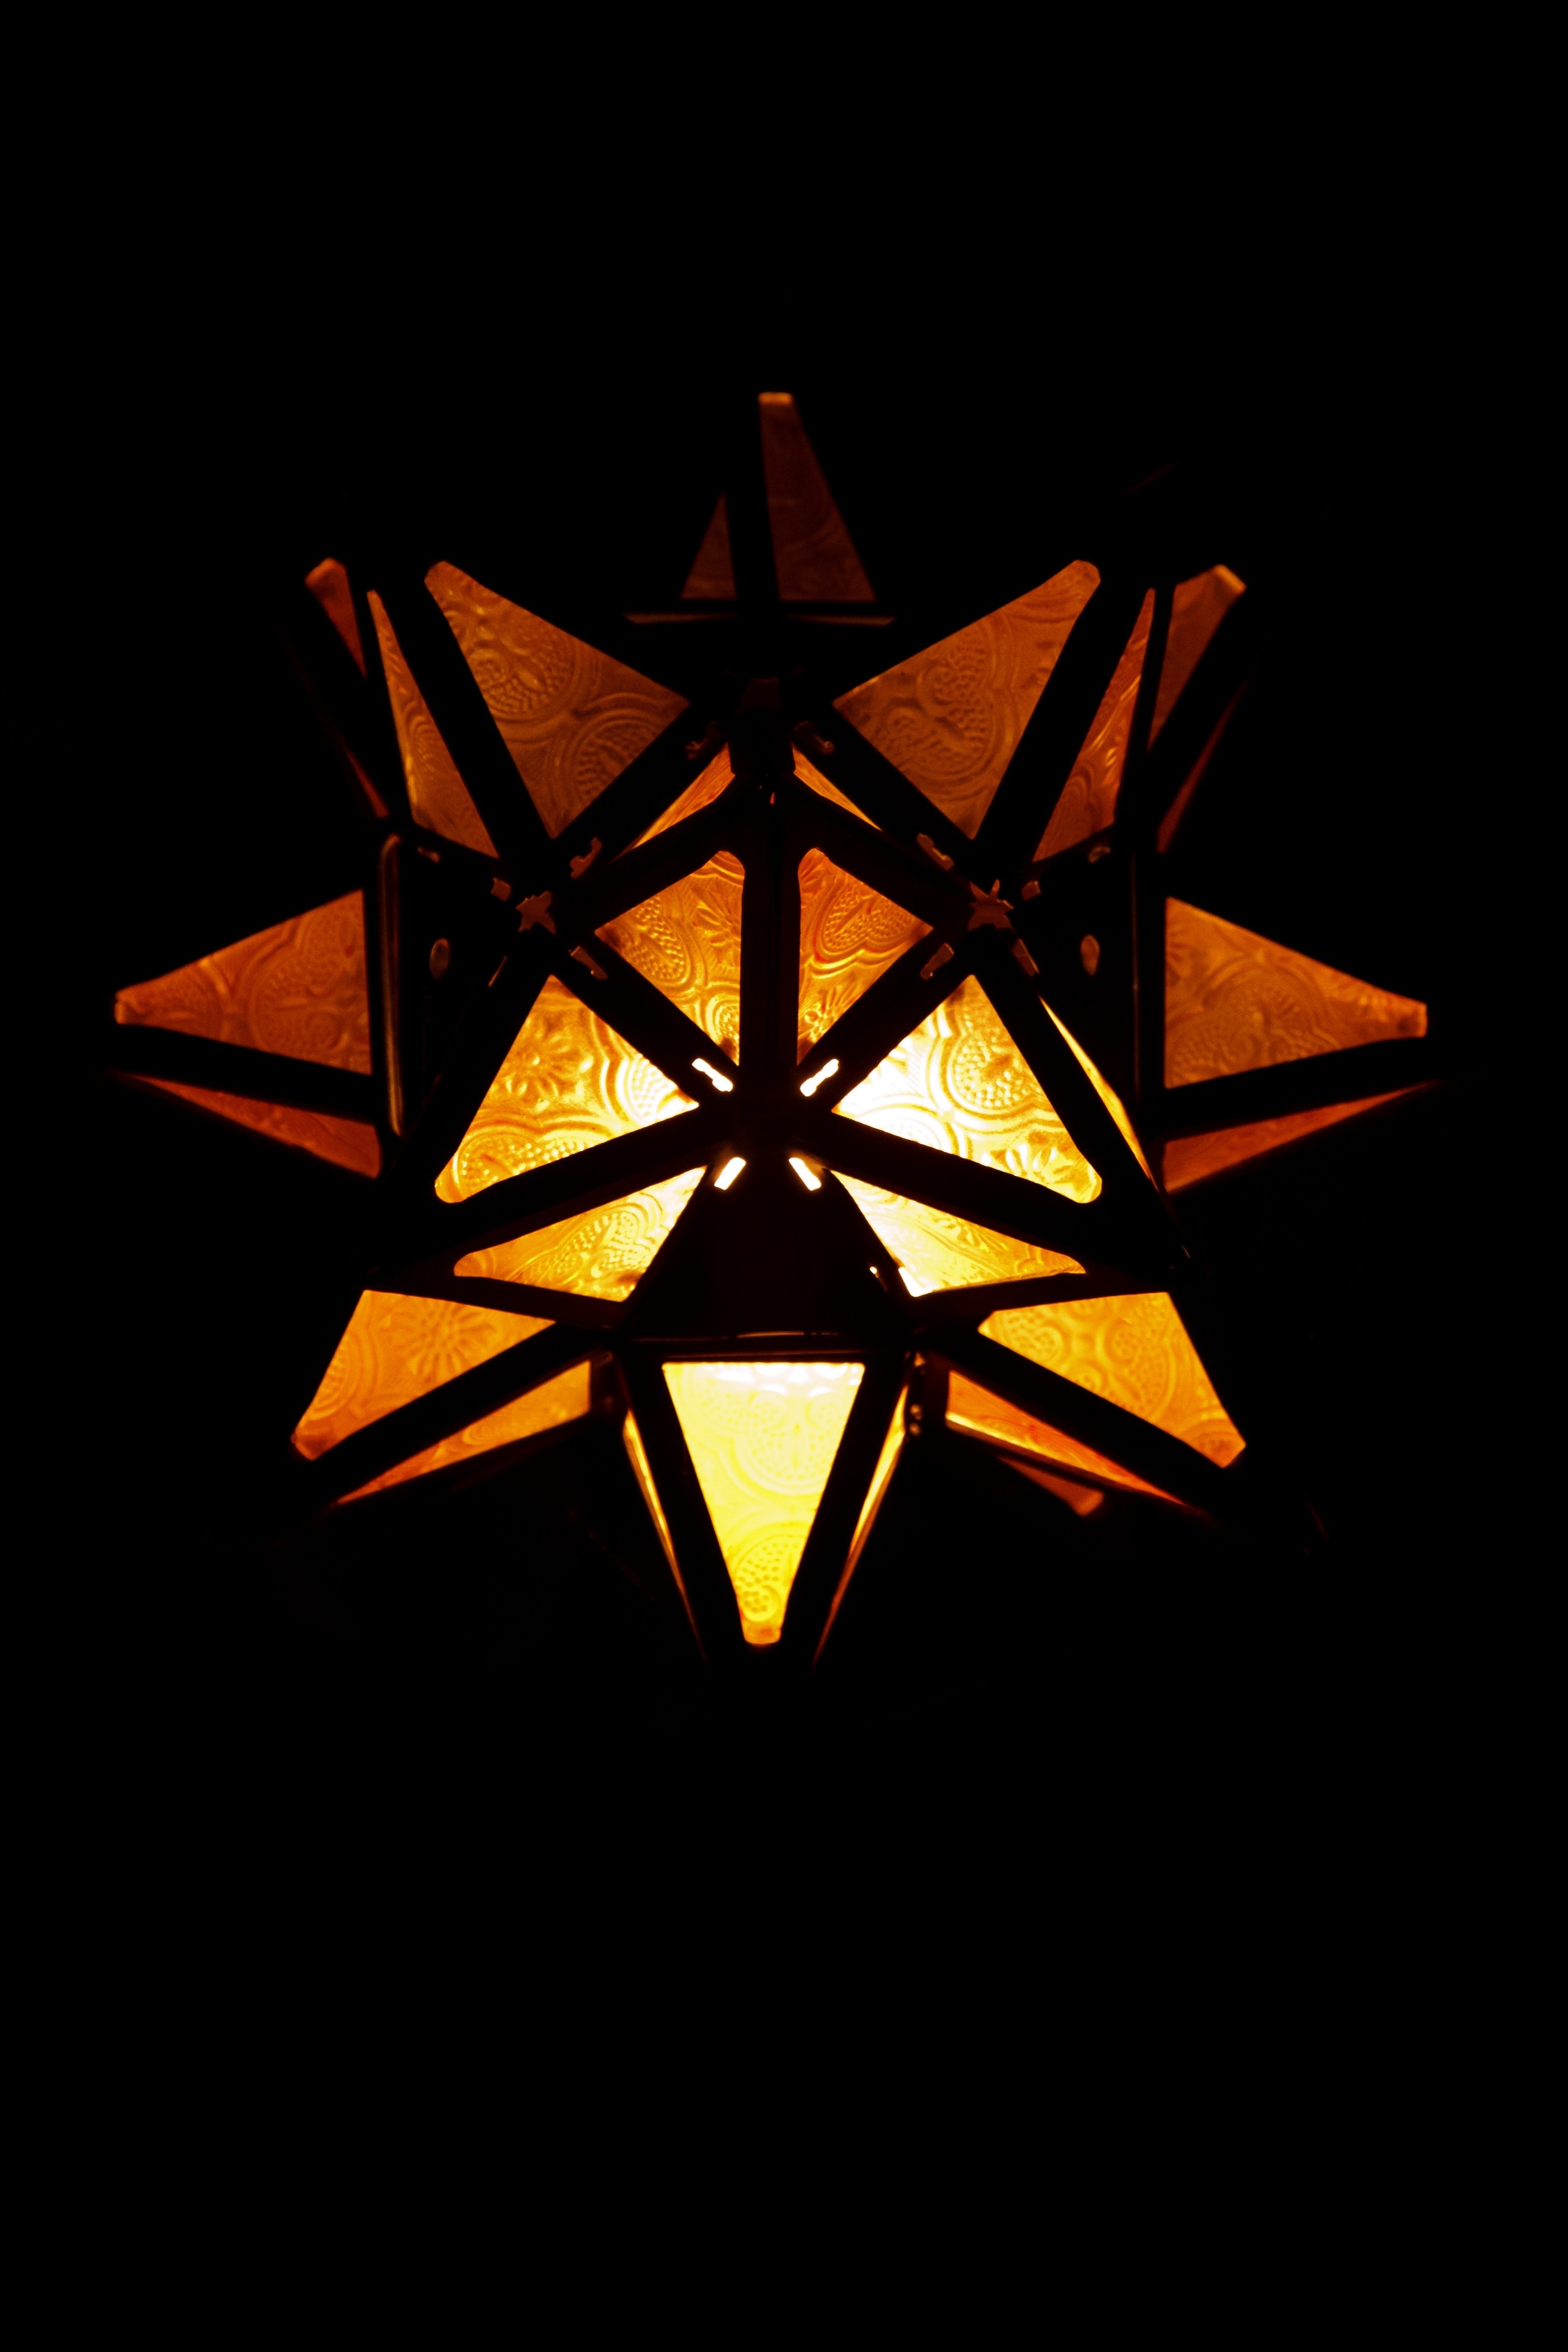 red and yellow star shape lantern